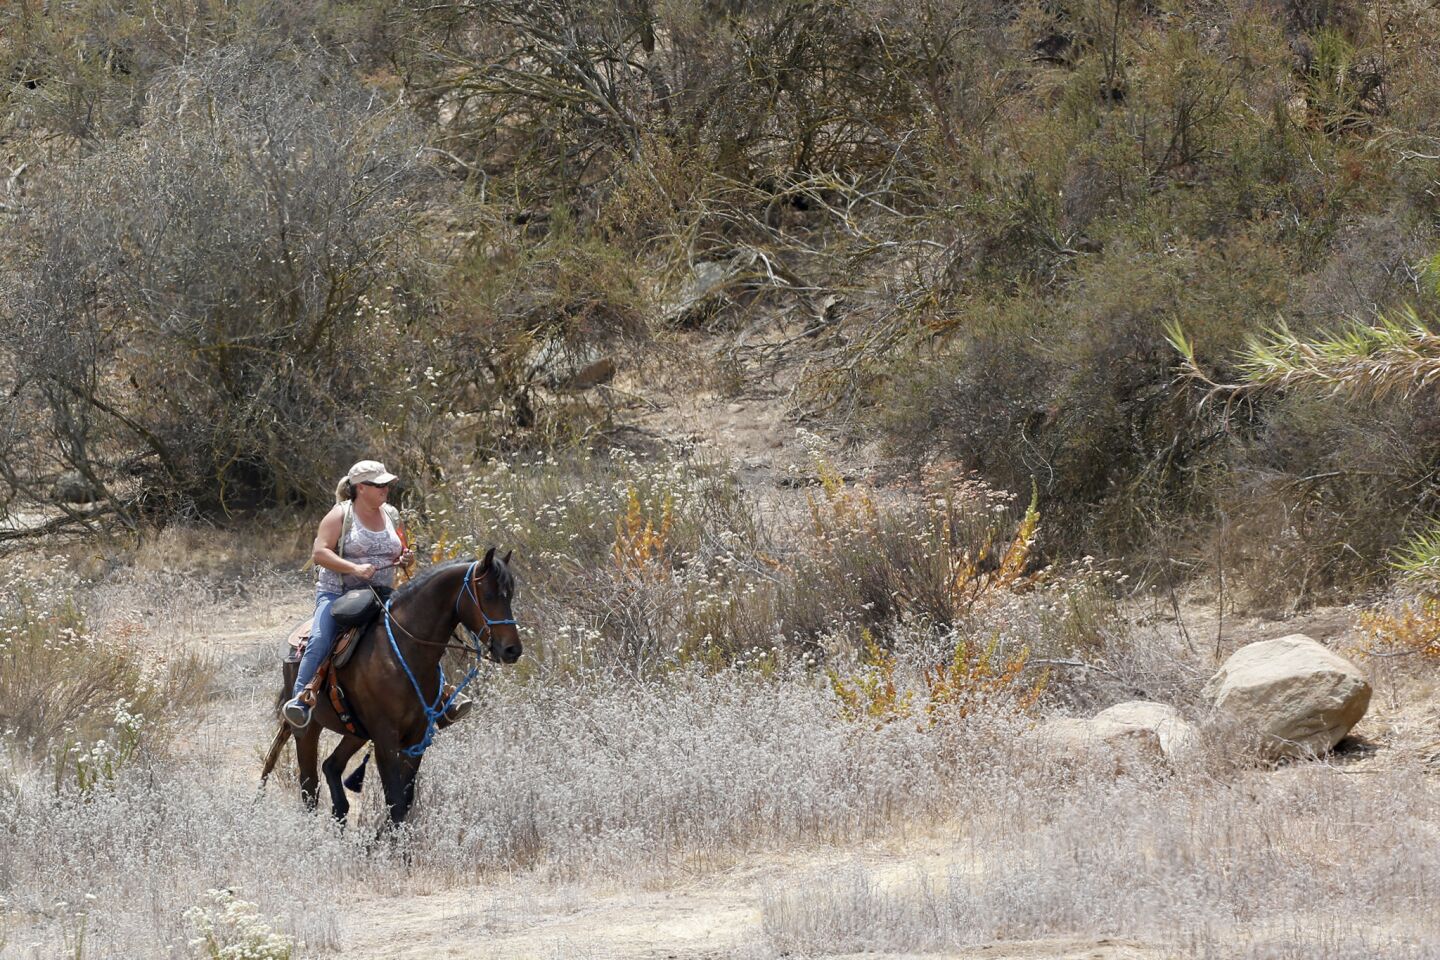 Molly Jenks searches on horseback for missing 11-year-old Terry Dewayne Smith.